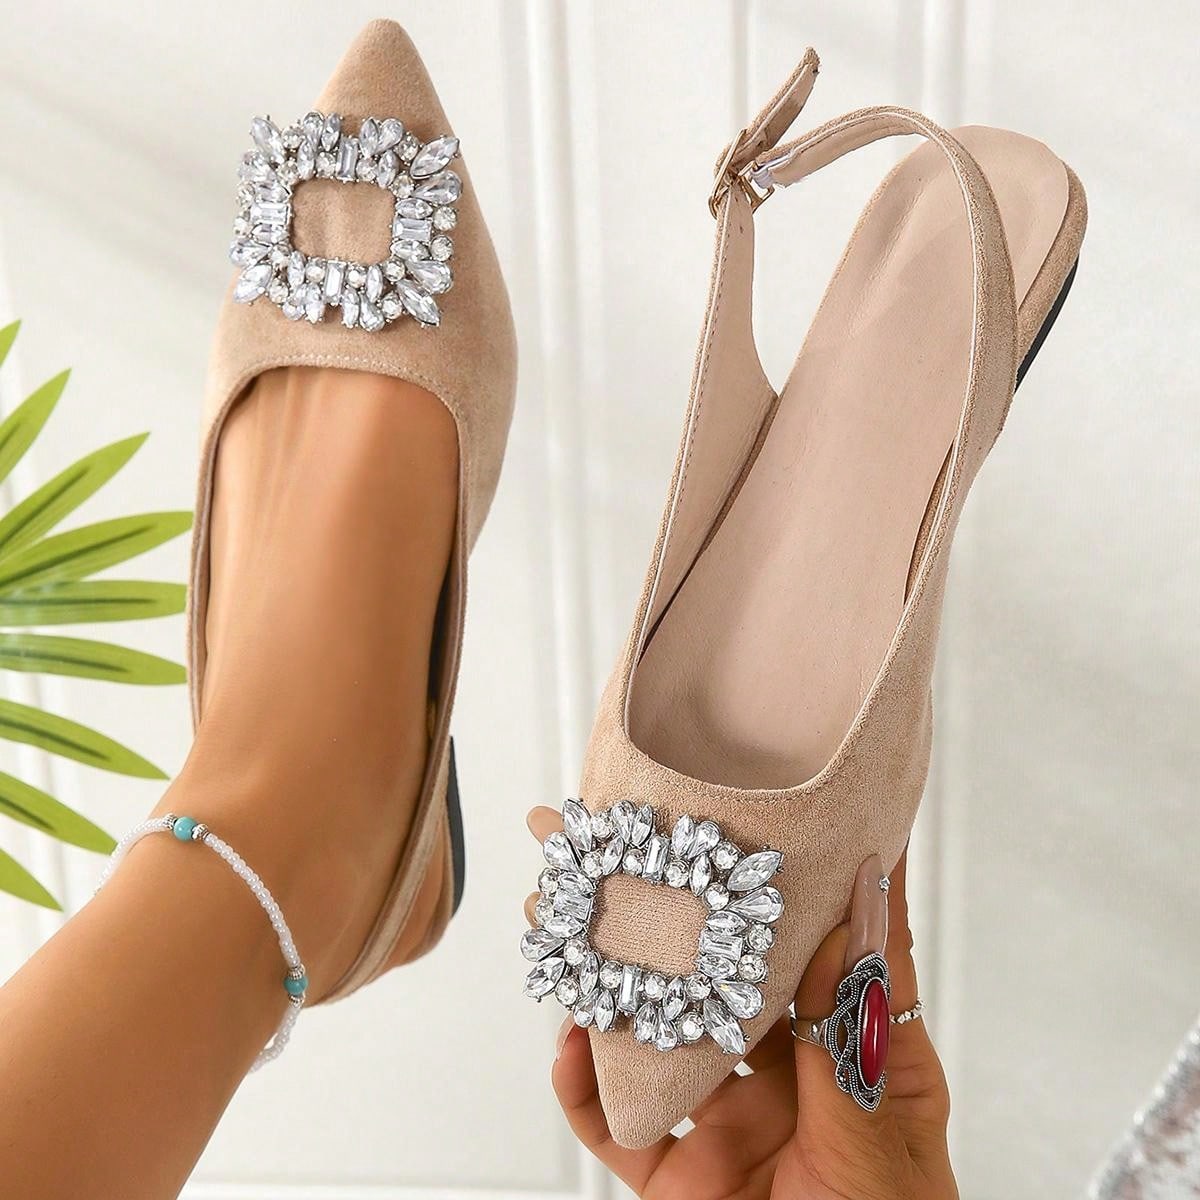 Glamorous Low Heel Flats: Sparkling Rhinestone Accents for Everyday Sophistication